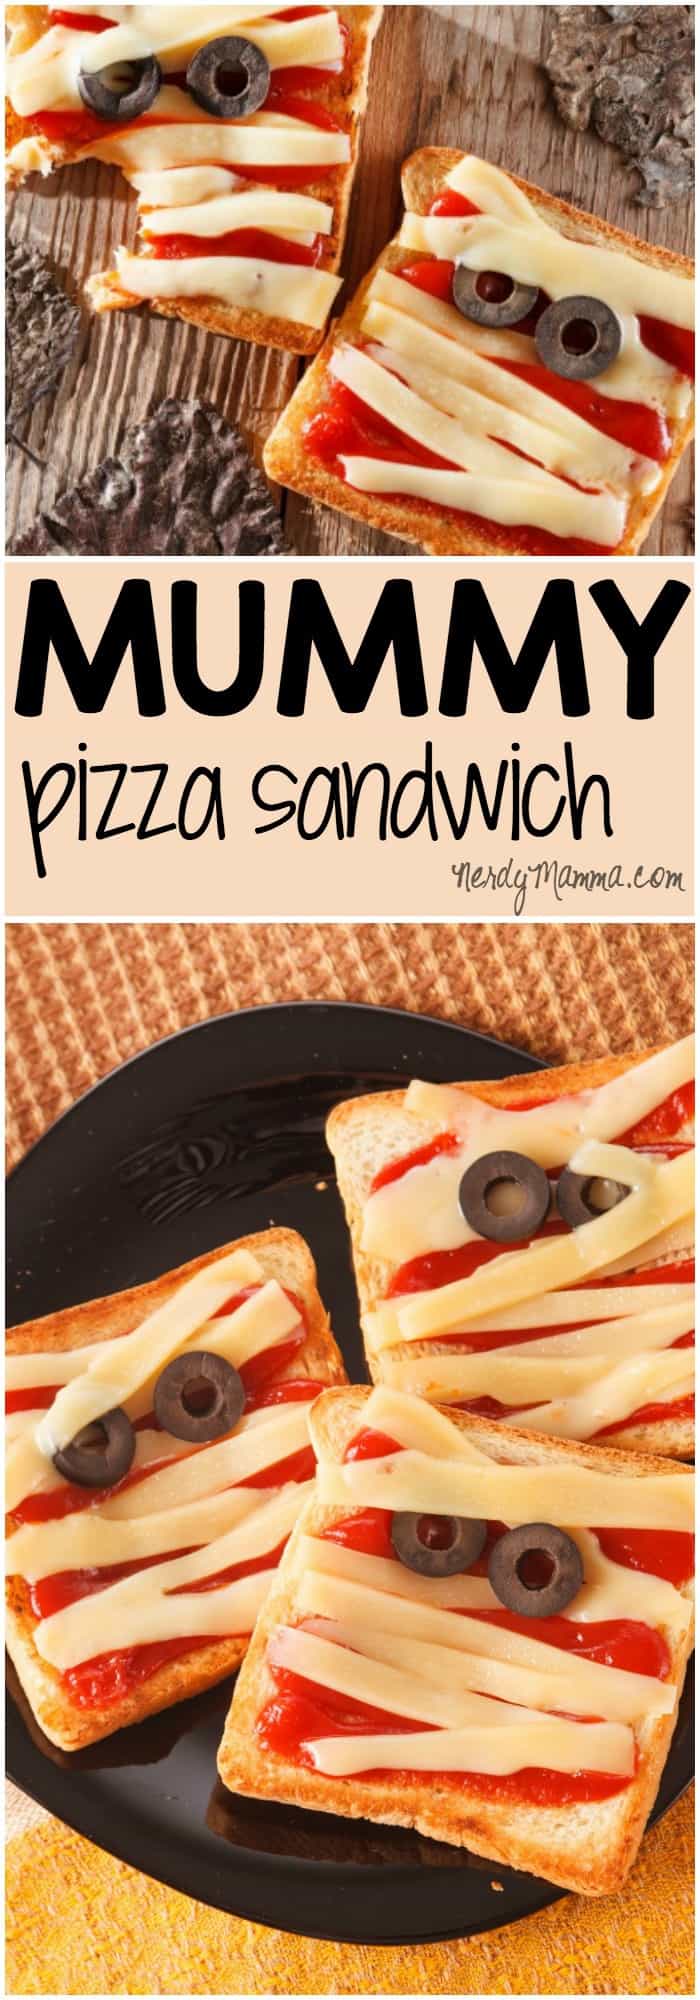 My kids are going to love these easy sandwiches made-up for halloween...Mummy pizza sandwiches! Too cute!